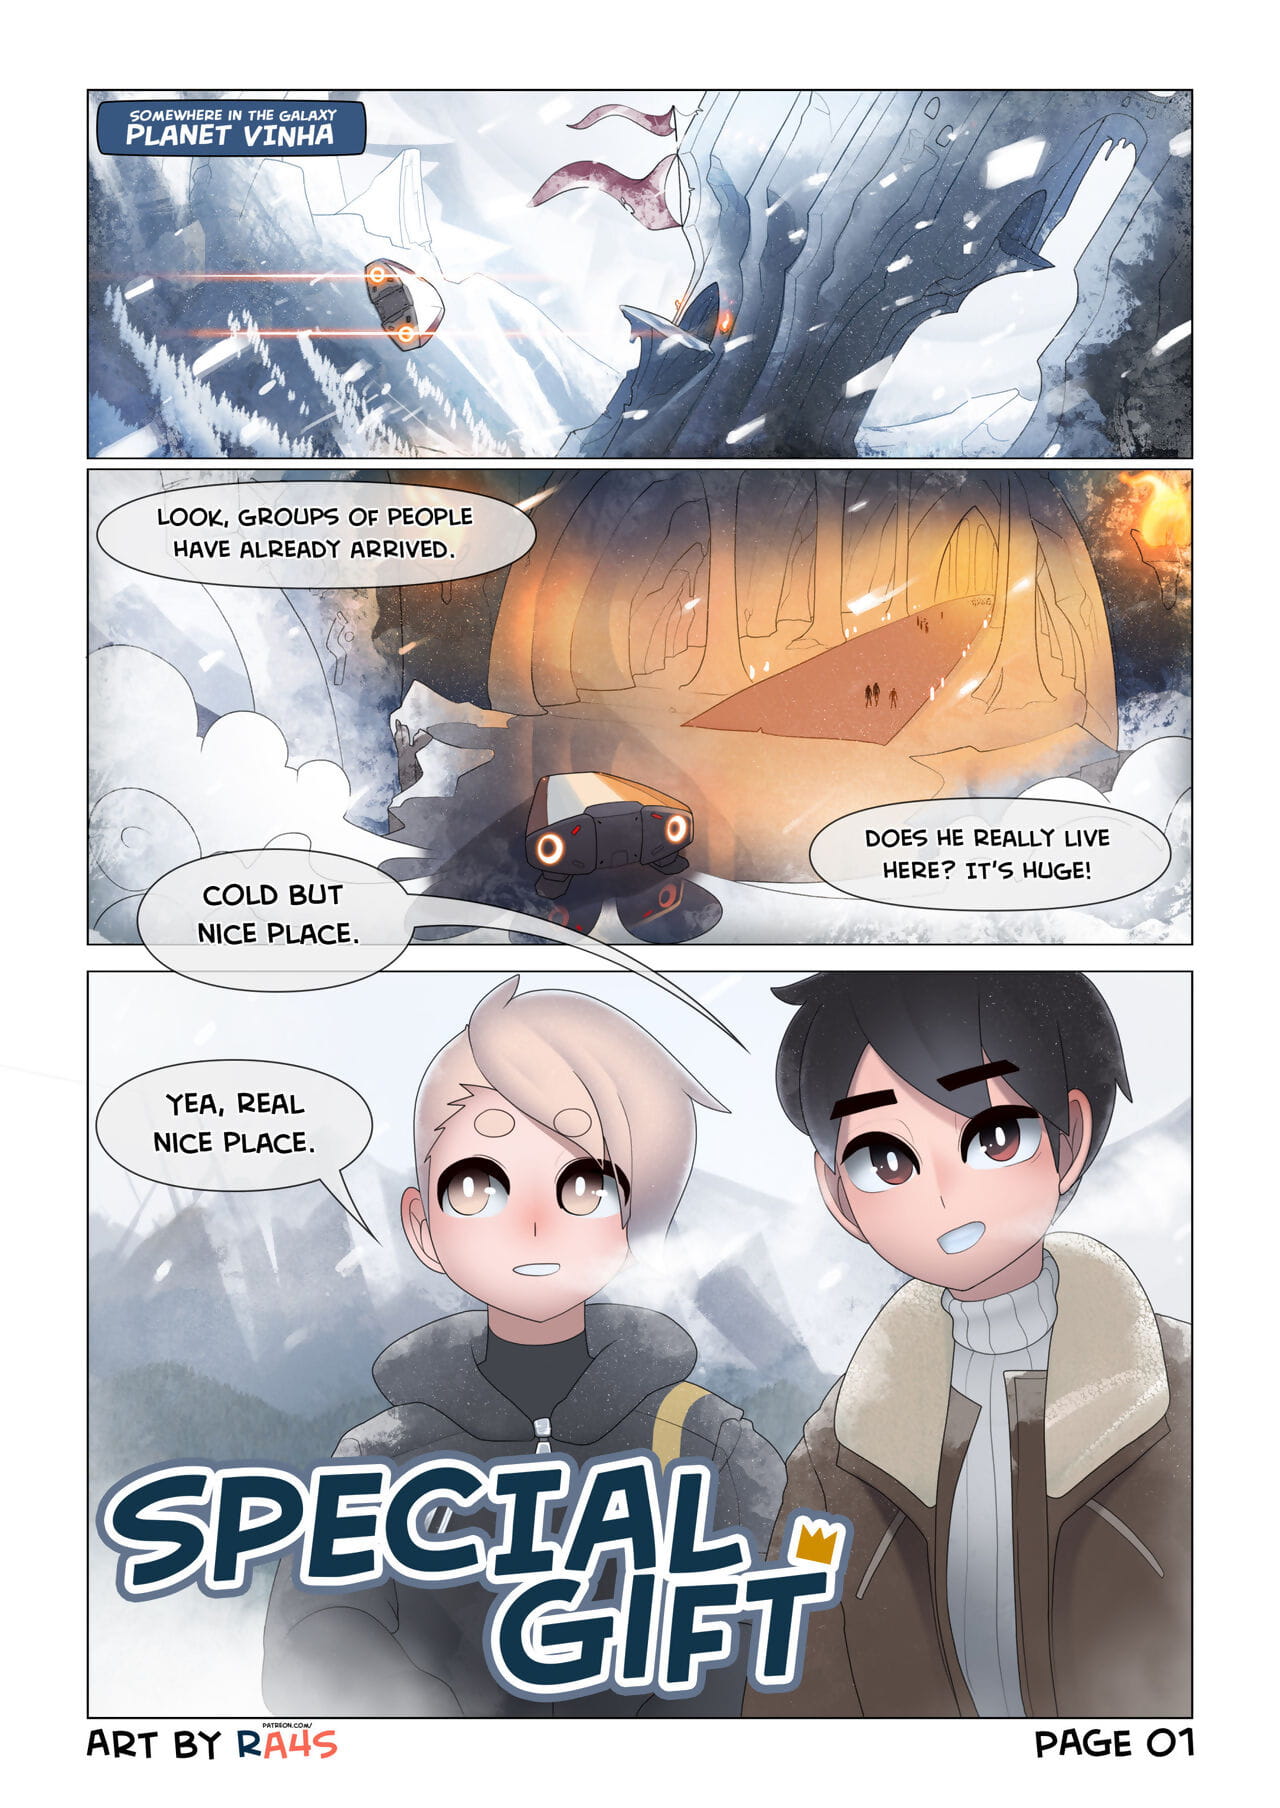 Speciale gift! Korte Comic commissie page 1